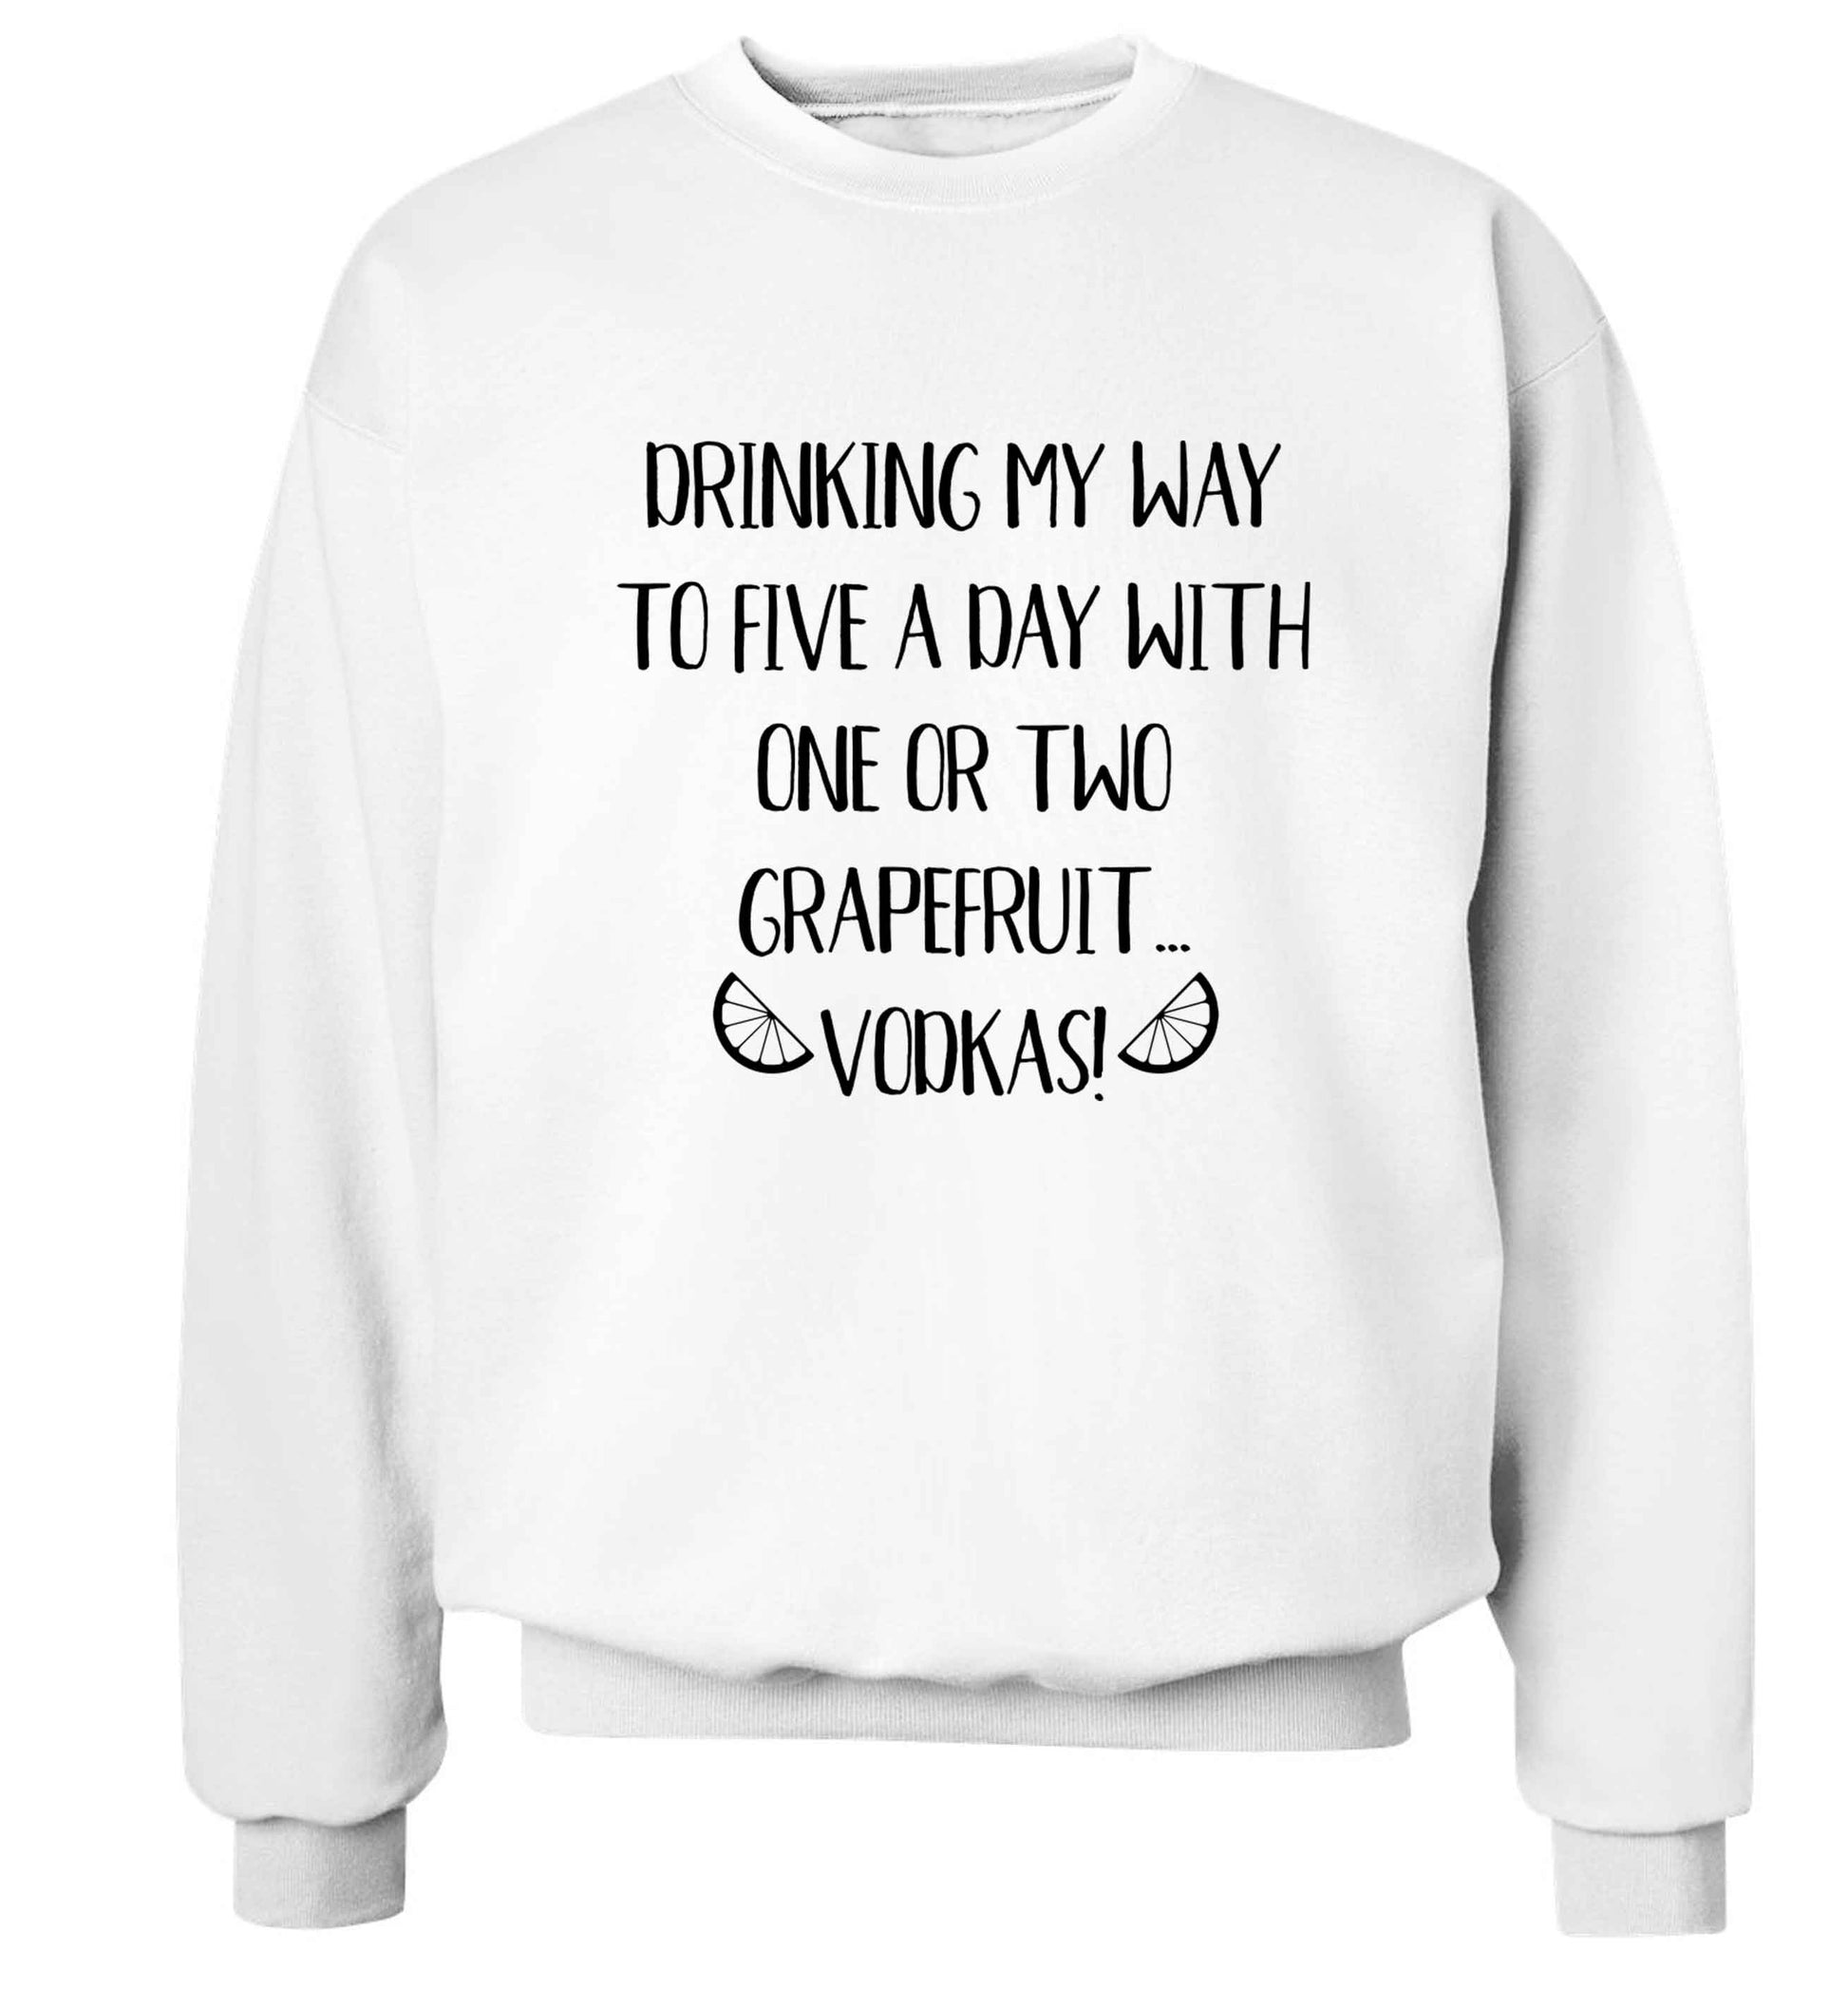 Drinking my way to five a day with one or two grapefruit vodkas Adult's unisex white Sweater 2XL